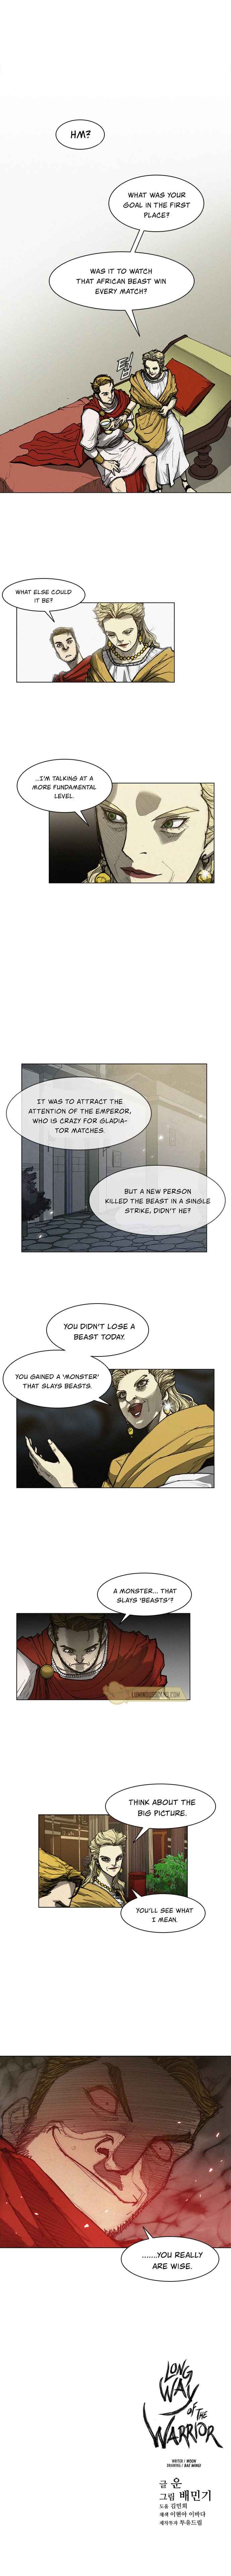 The Long Way Of The Warrior - Chapter 6 Page 10